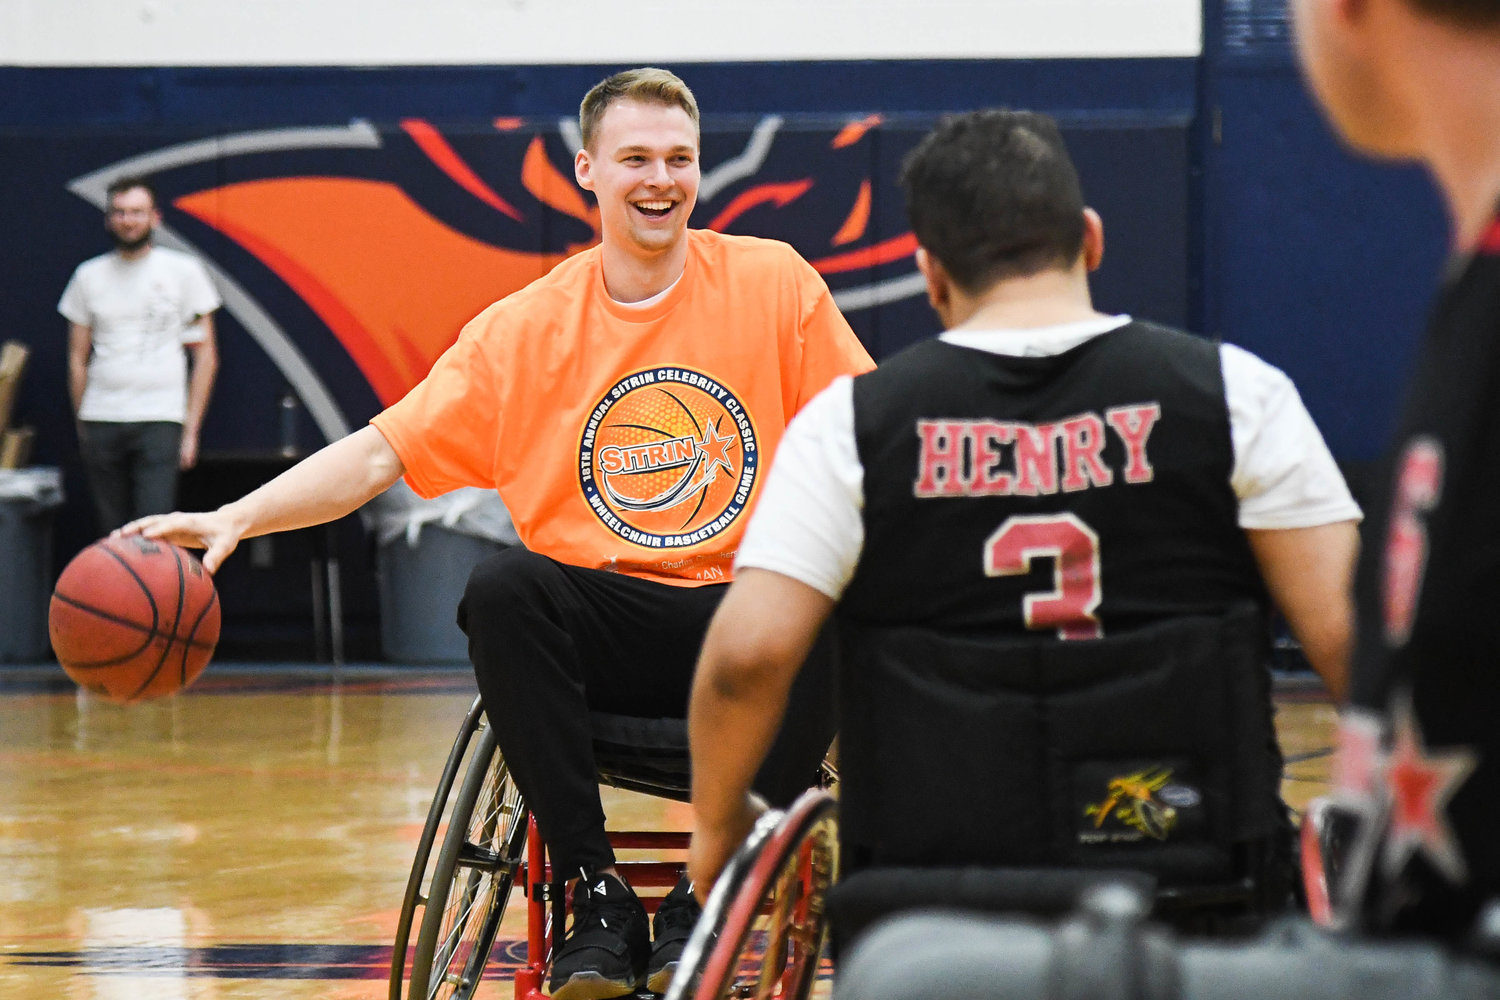 DRIBBLING THE BALL — Syracuse Orange player Buddy Boeheim dribbles the ball during the 18th annual Sitrin Celebrity Wheelchair Basketball Game on Thursday night at Utica University.